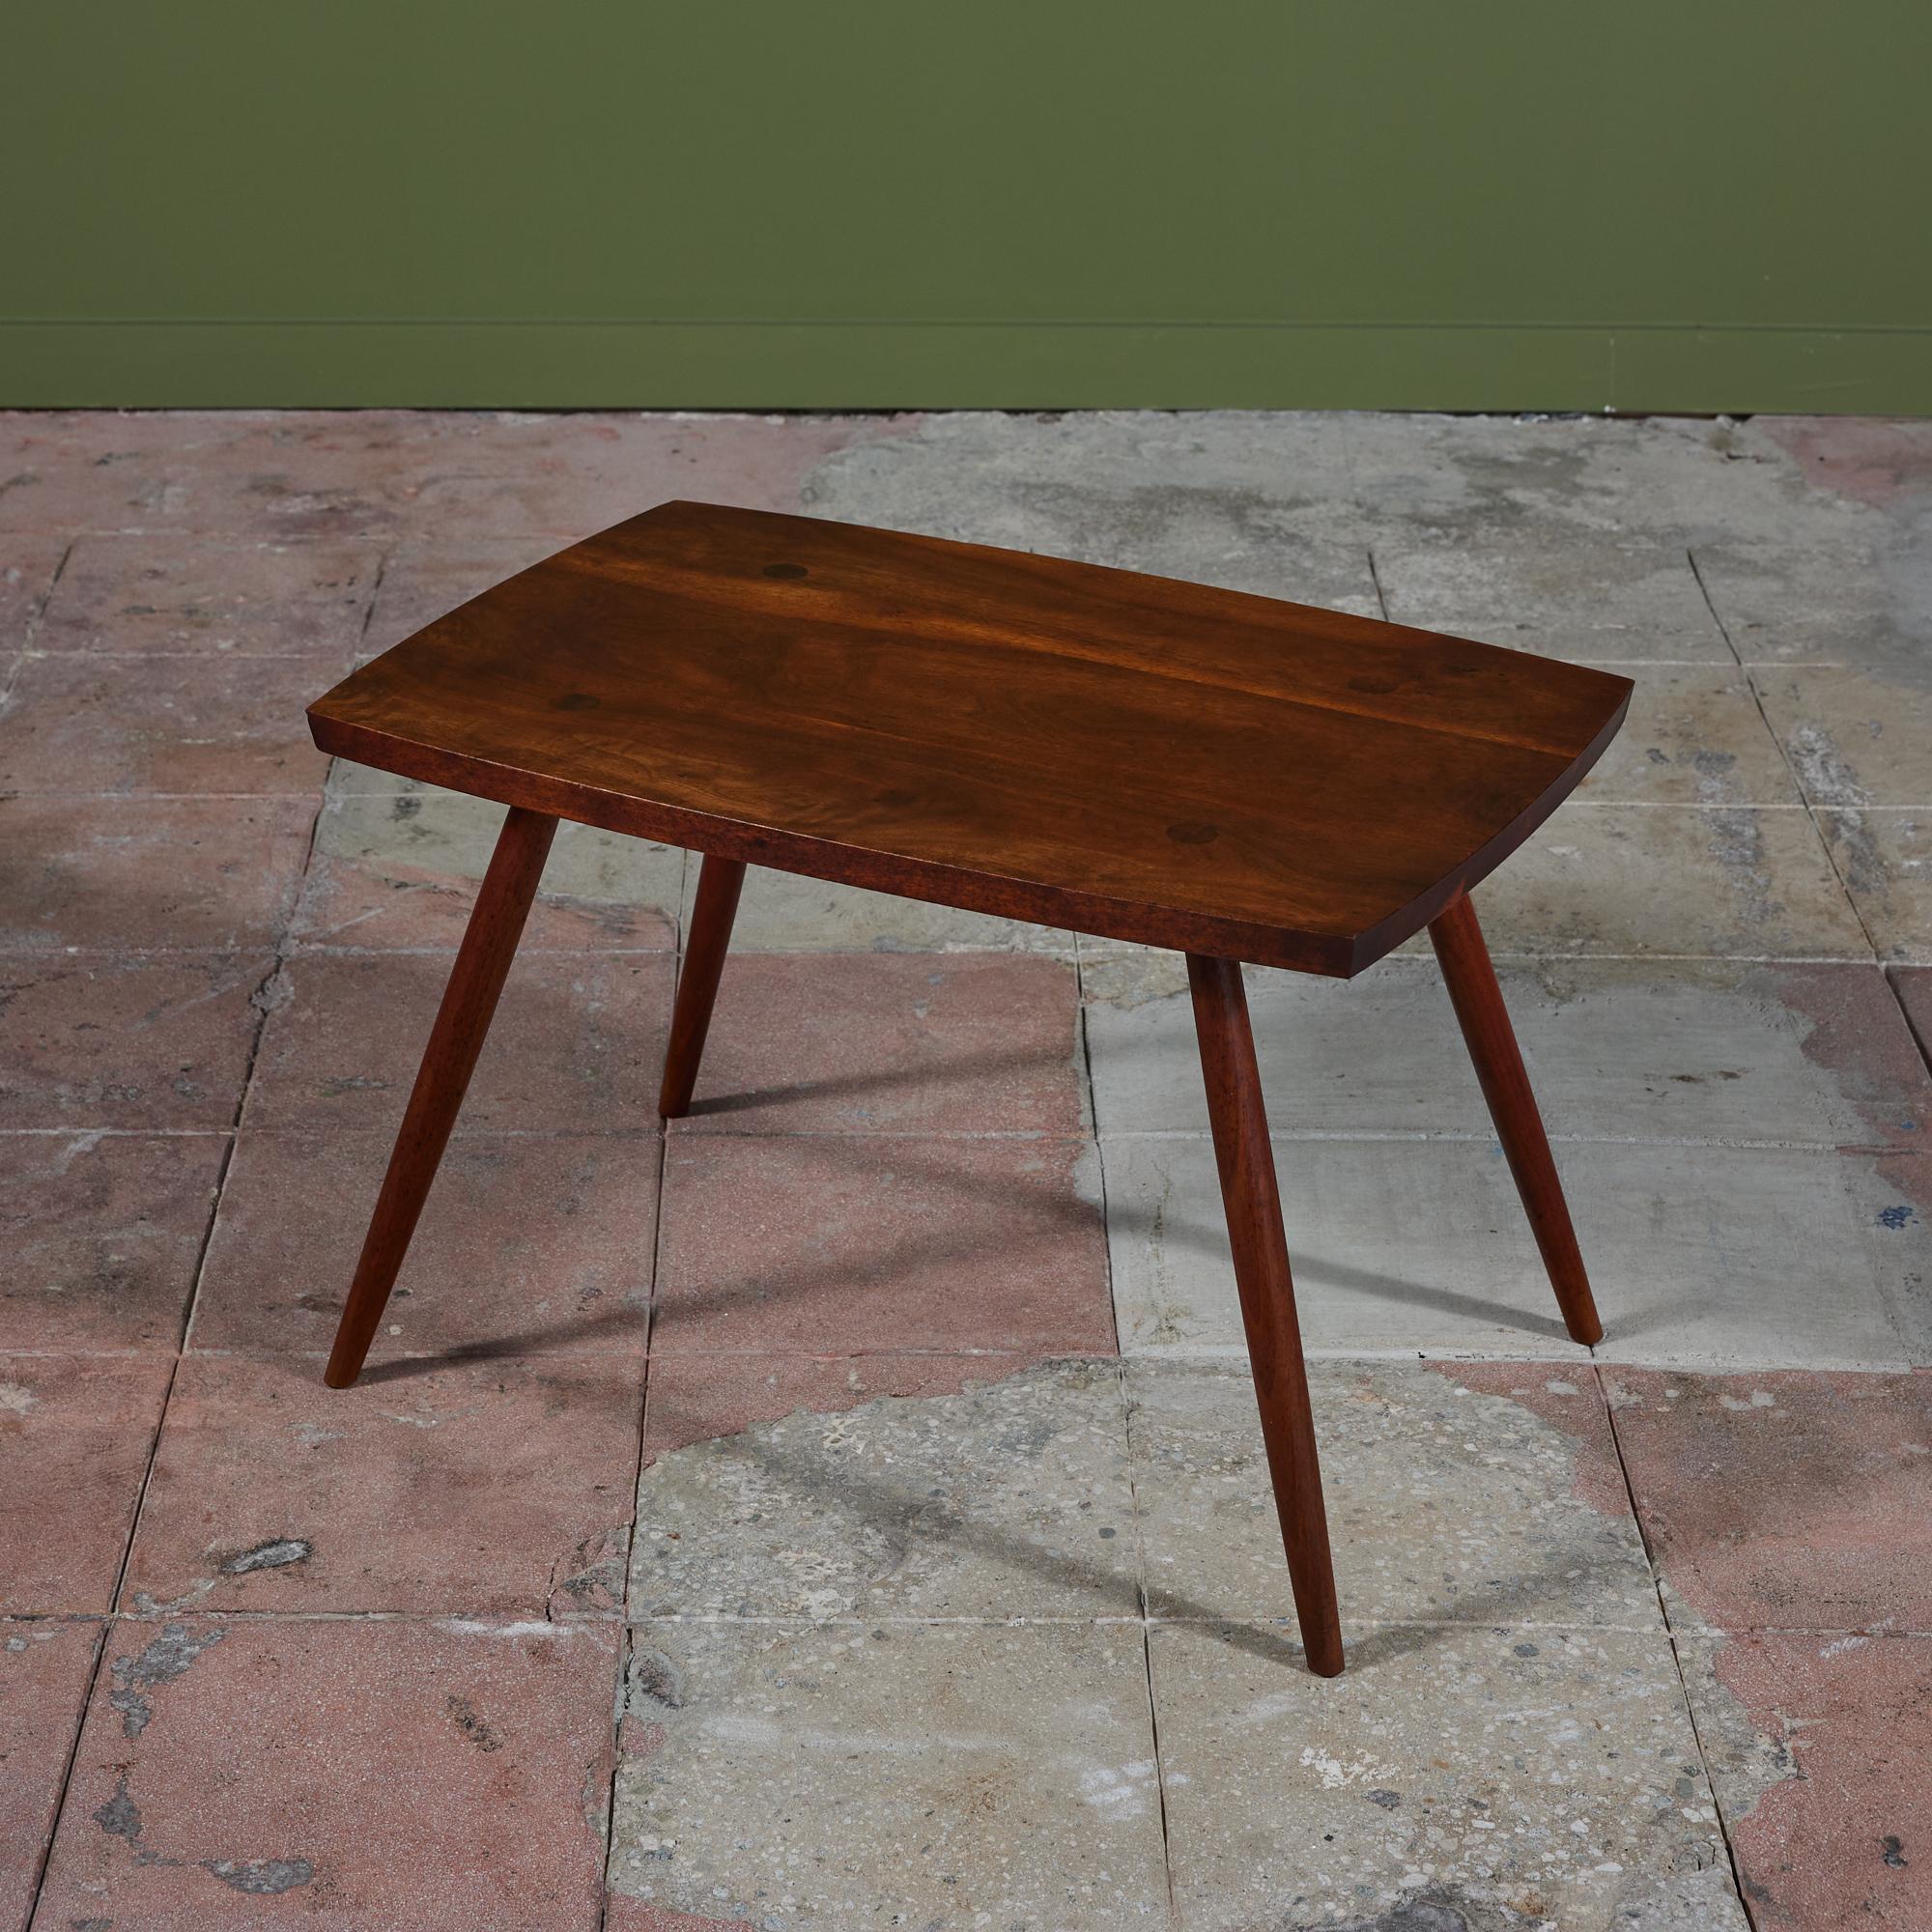 Black walnut side table from the New Hope, Pennsylvania Studio of George Nakashima. The rectangular table is minimal in design and features long tapered legs.

Dimensions:
29” width x 19” depth x 18.5” height

Condition:
Good vintage condition;